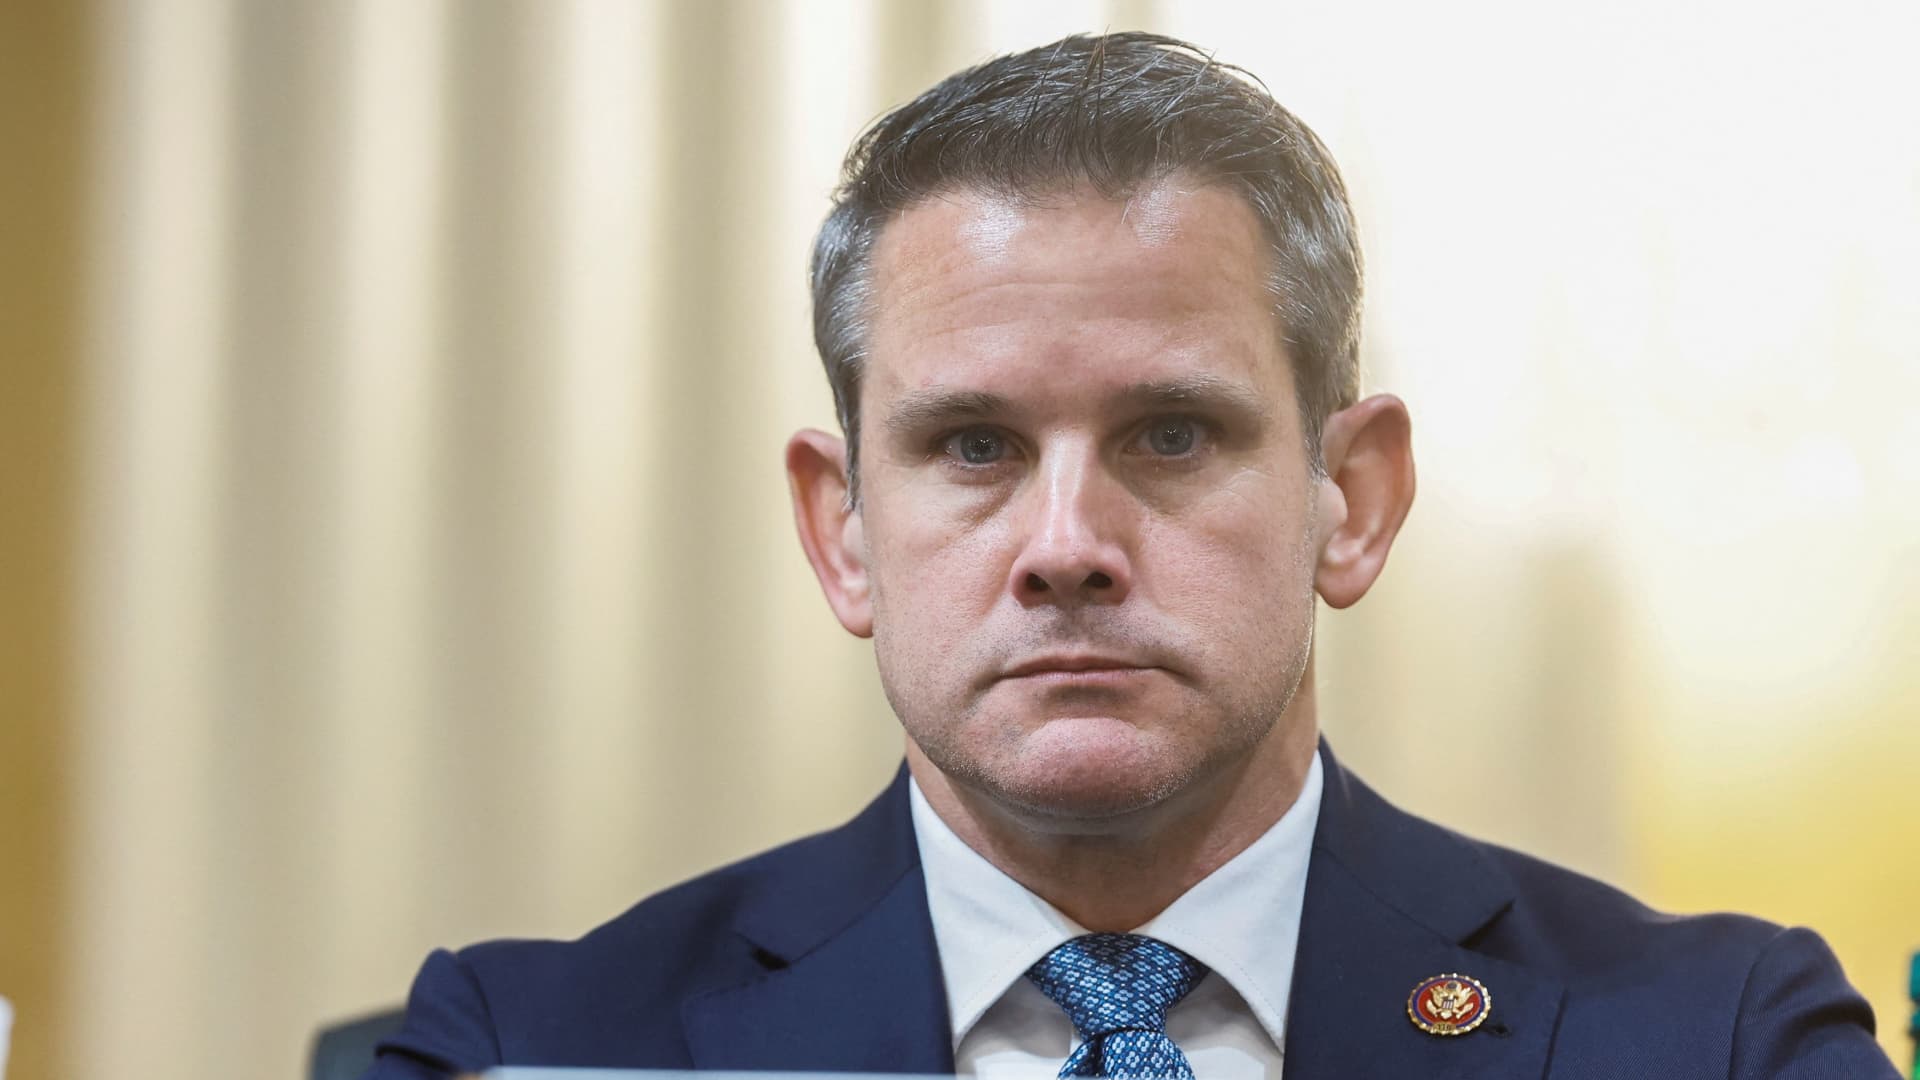 U.S. Representative Adam Kinzinger (R-IL) participates at the opening public hearing of the U.S. House Select Committee to Investigate the January 6 Attack on the United States Capitol, on Capitol Hill in Washington, U.S., June 9, 2022.